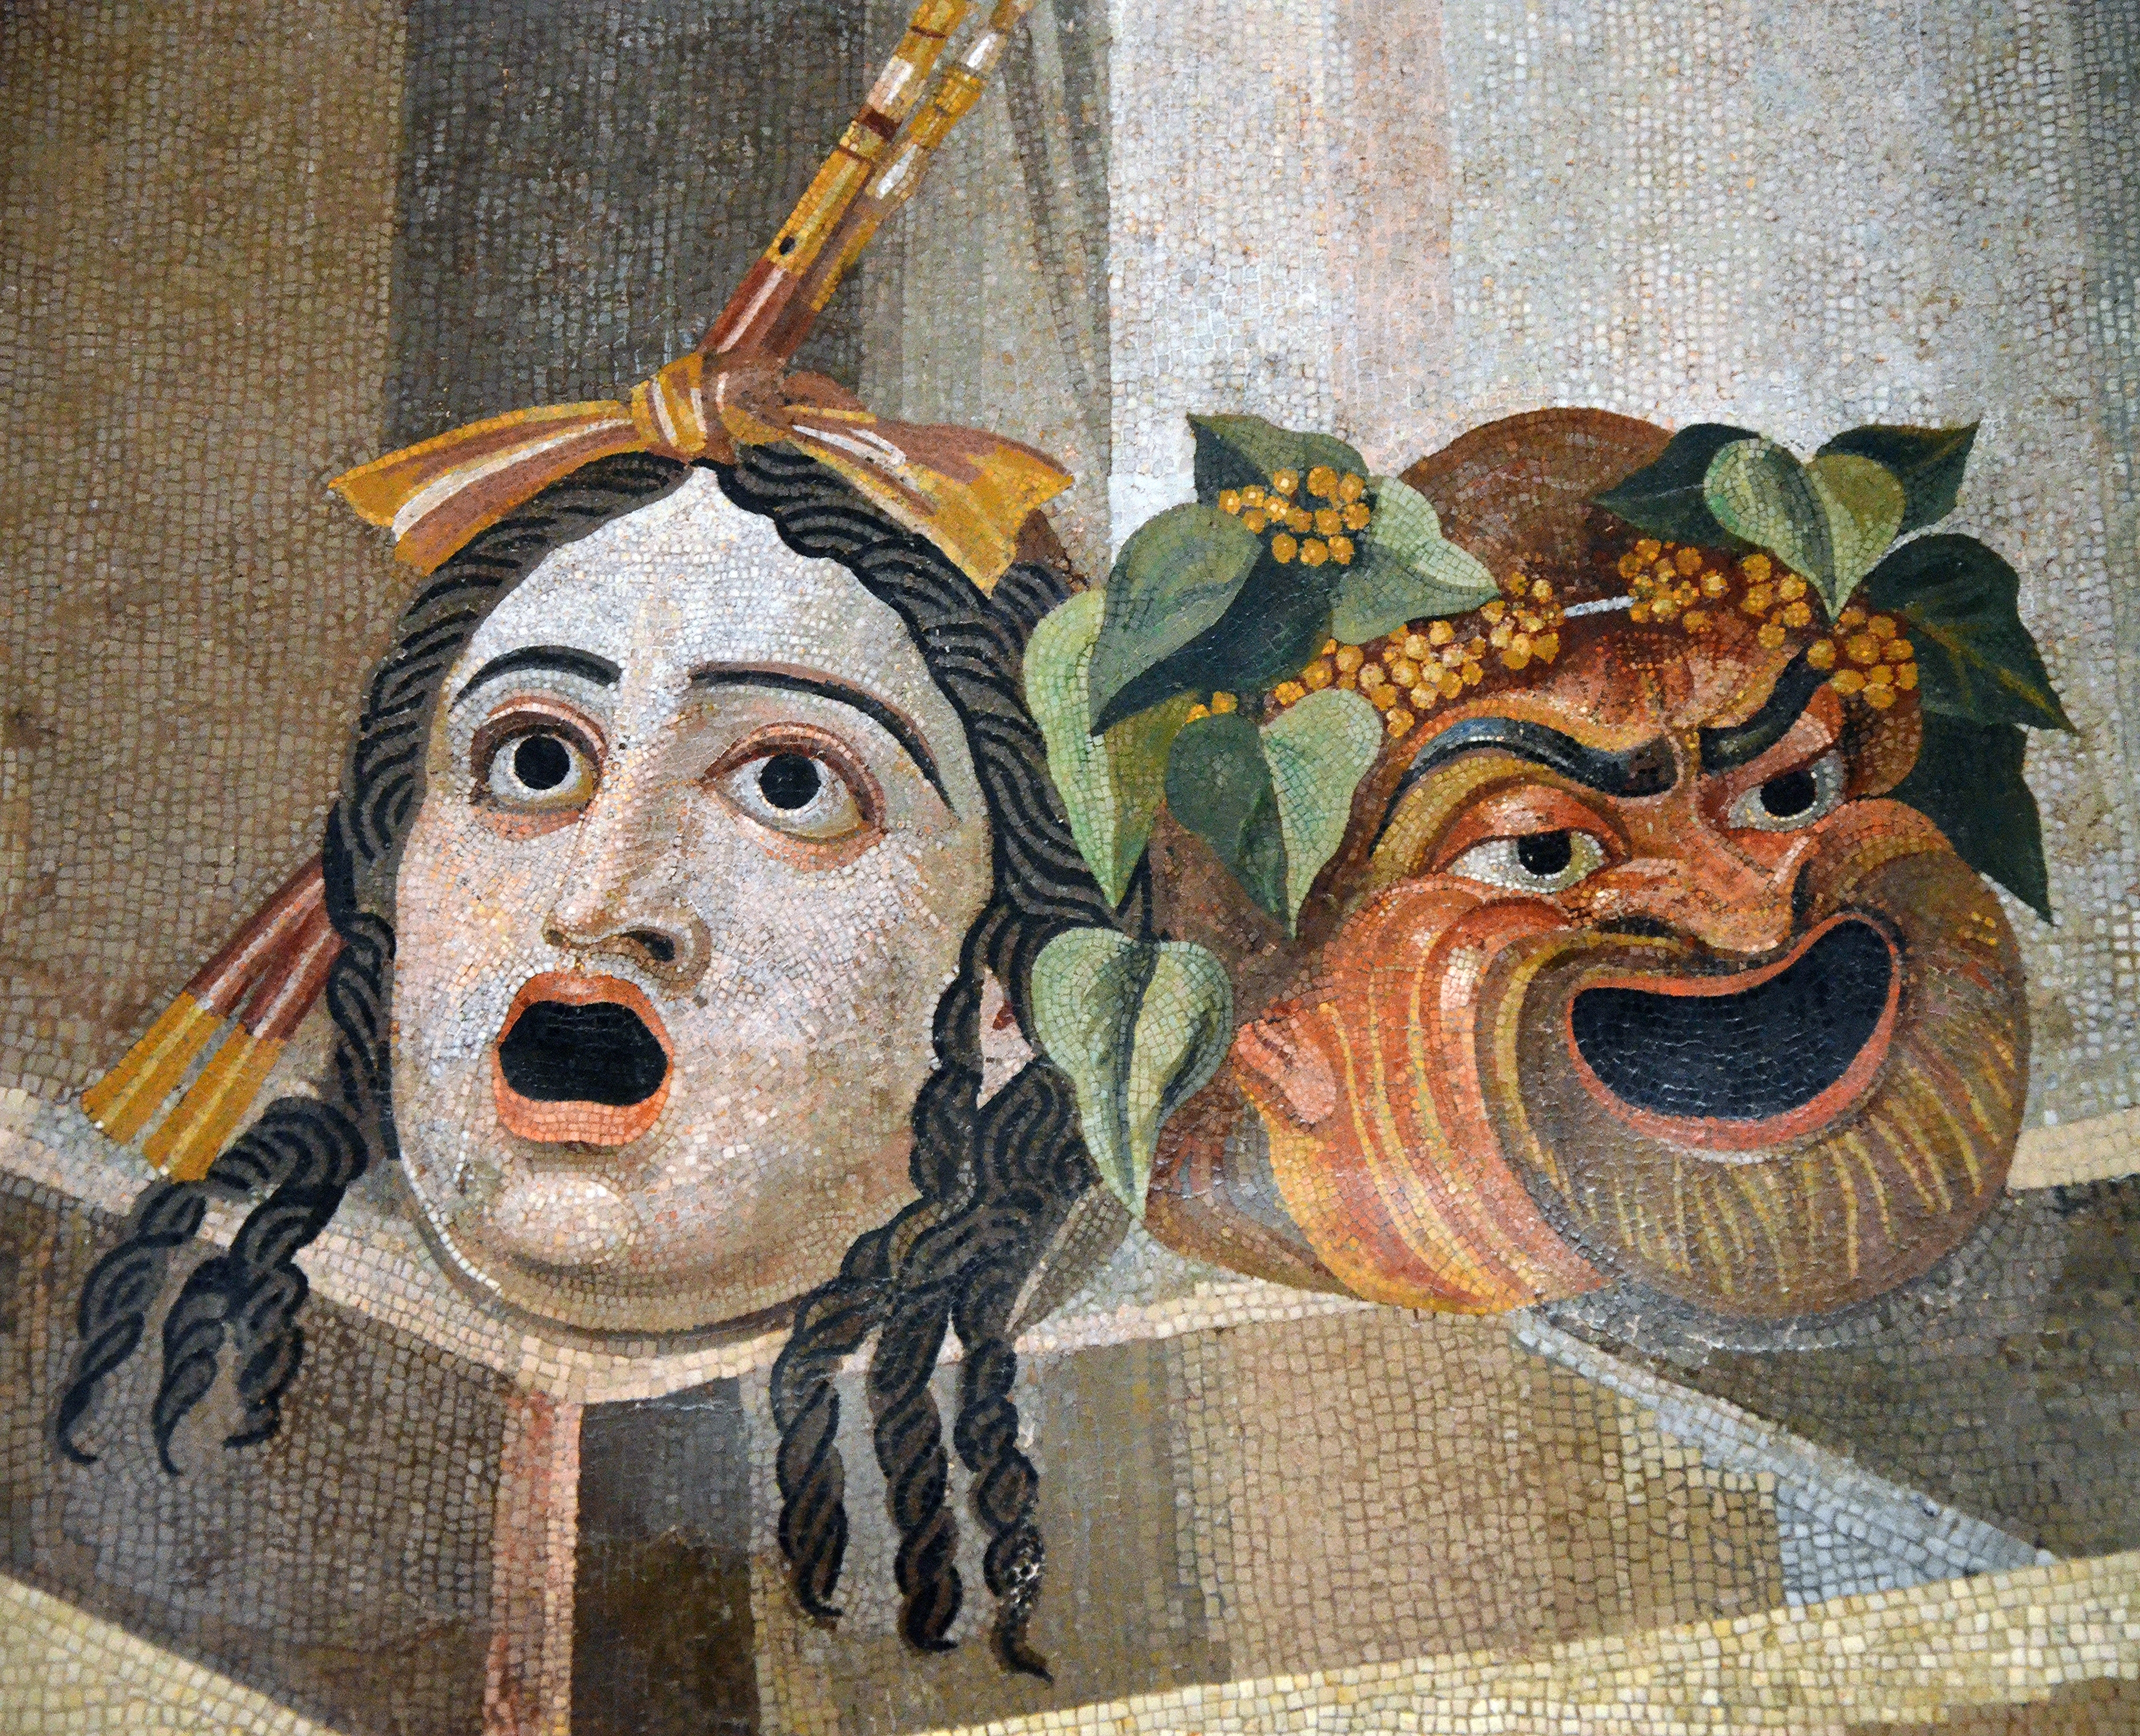 Mosaic_depicting_theatrical_masks_of_Tragedy_and_Comedy_(Thermae_Decianae).jpg